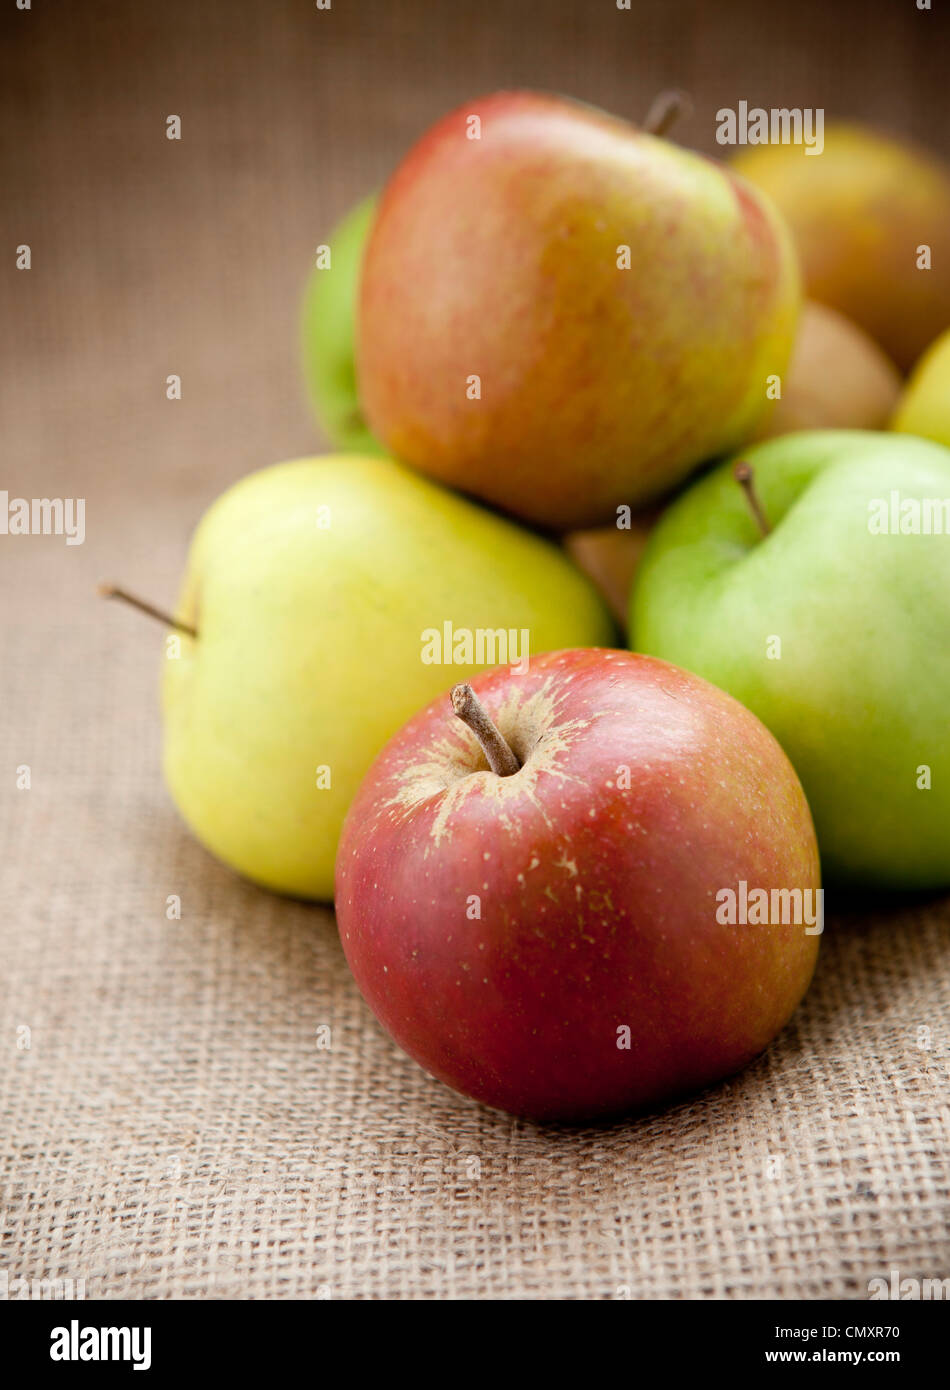 Apples on a hessian sack in natural light. Selection of fruit including Cox, Braeburn, Granny Smith, Golden Delicious, Jazz. Stock Photo